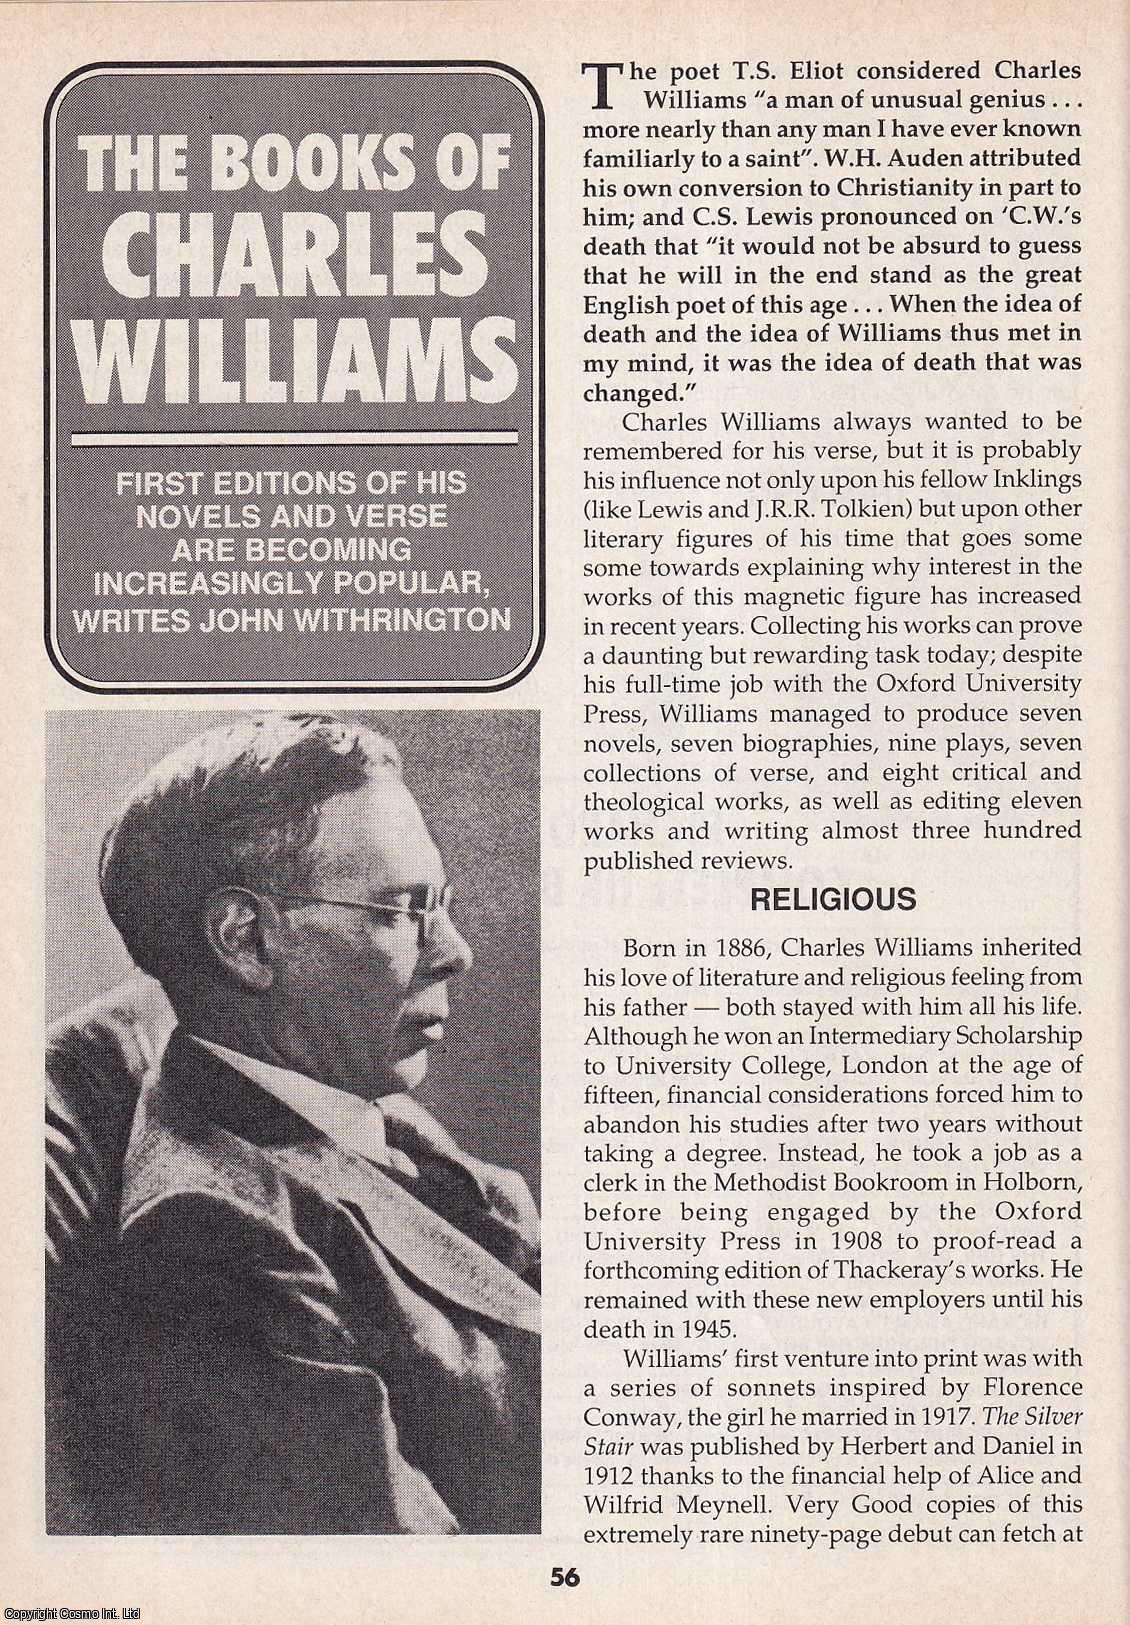 John Withrington - The Books of Charles Williams. This is an original article separated from an issue of The Book & Magazine Collector publication.